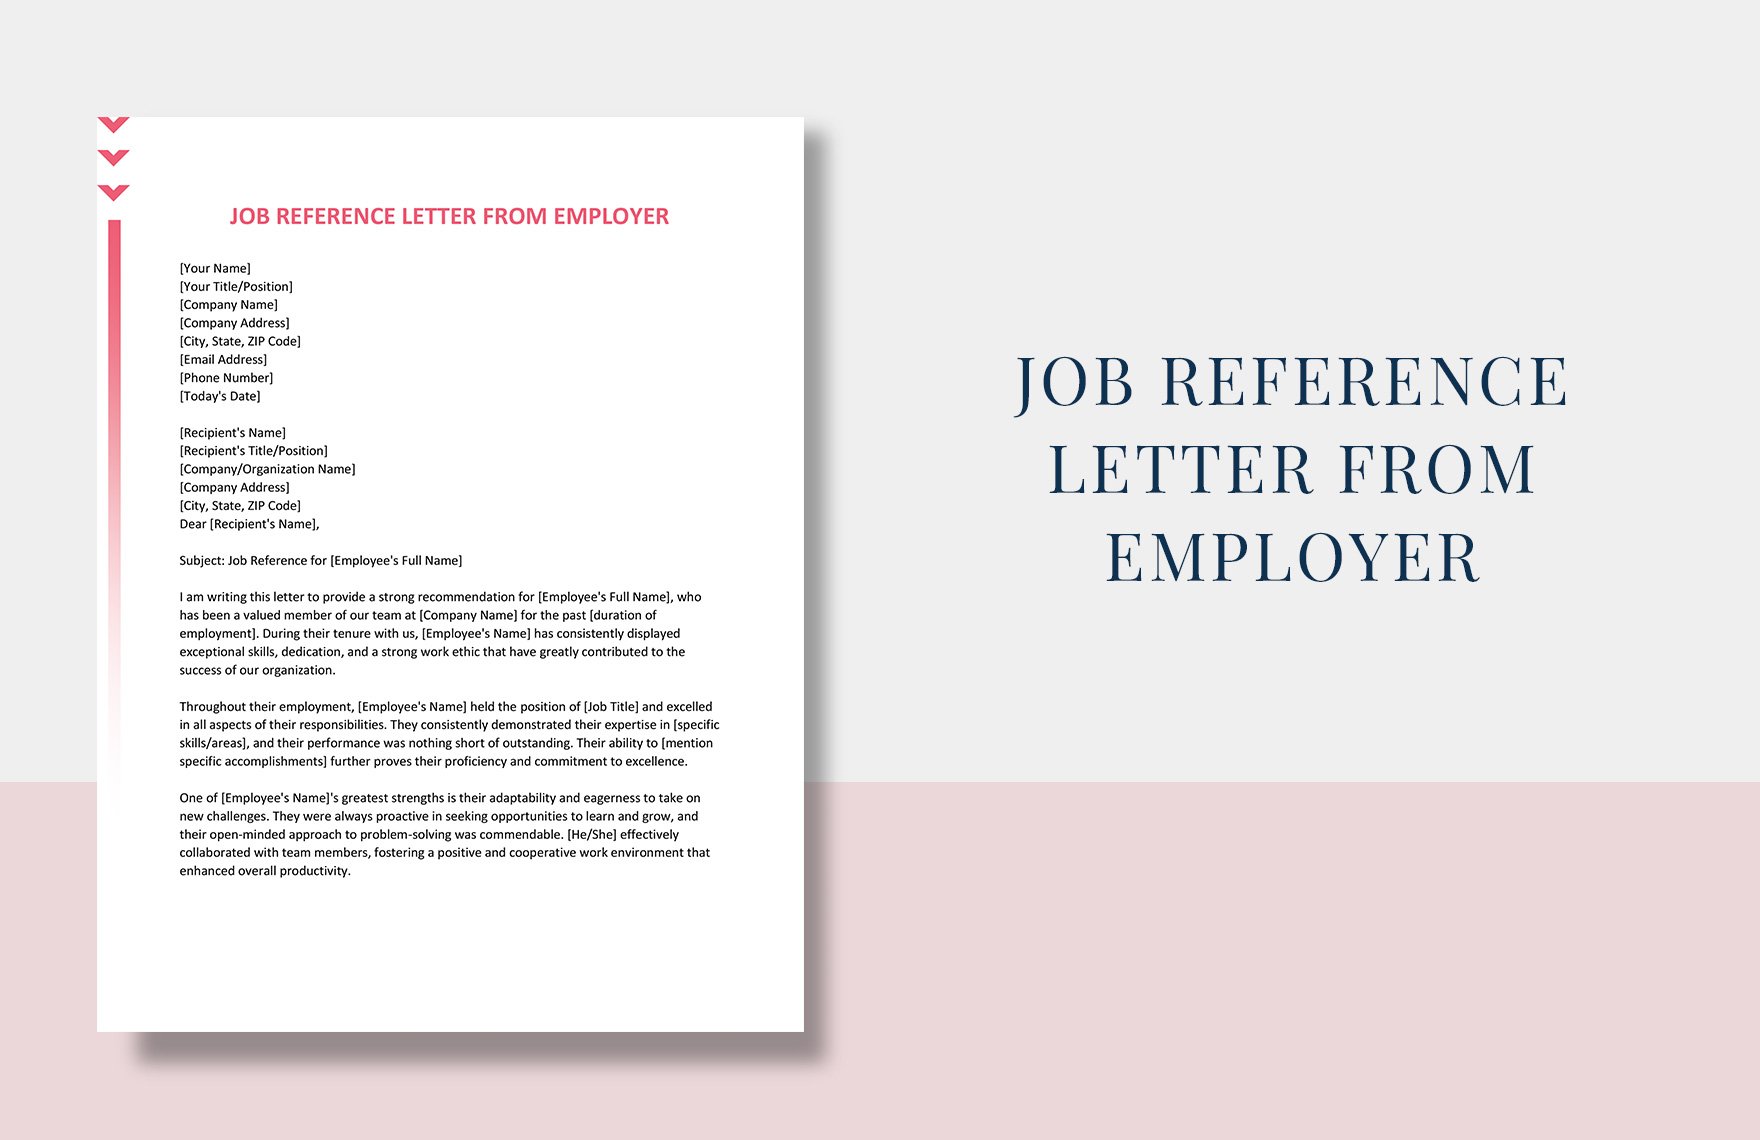 job-reference-letter-from-employer